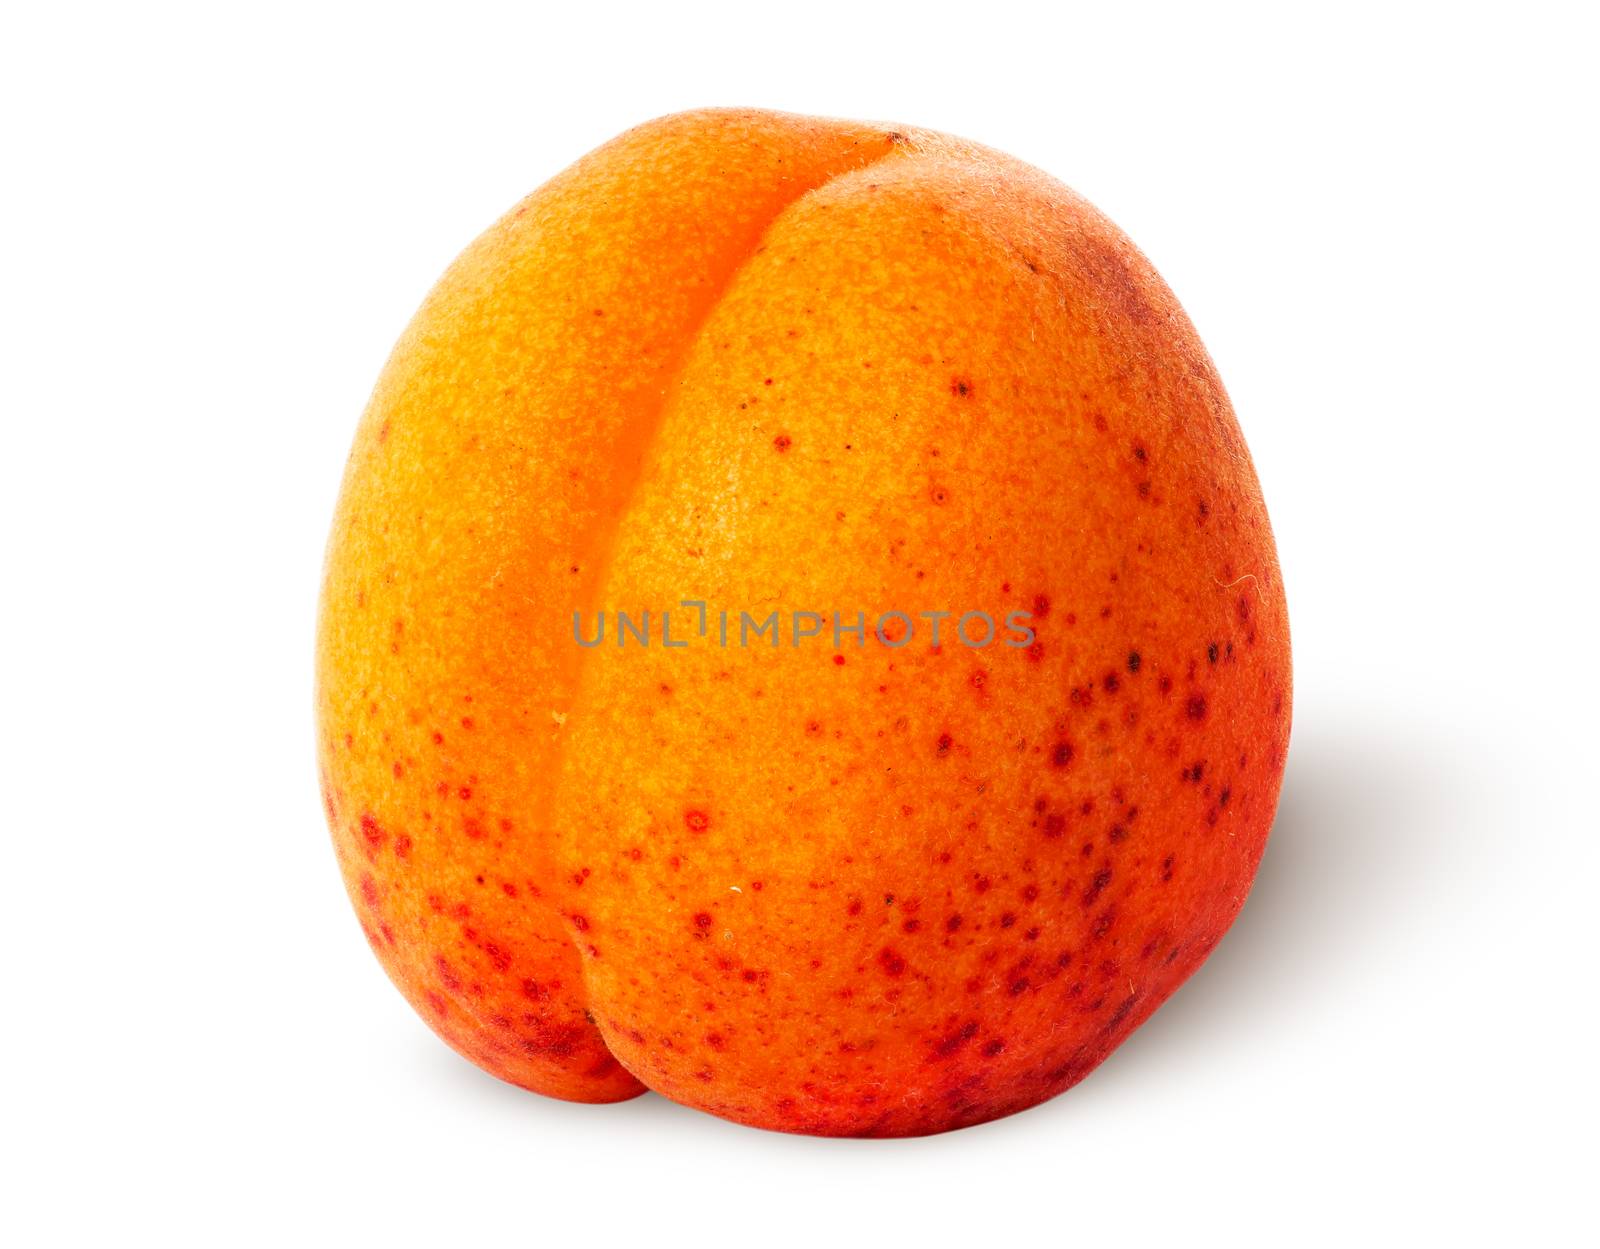 Juicy ripe apricot isolated on white background